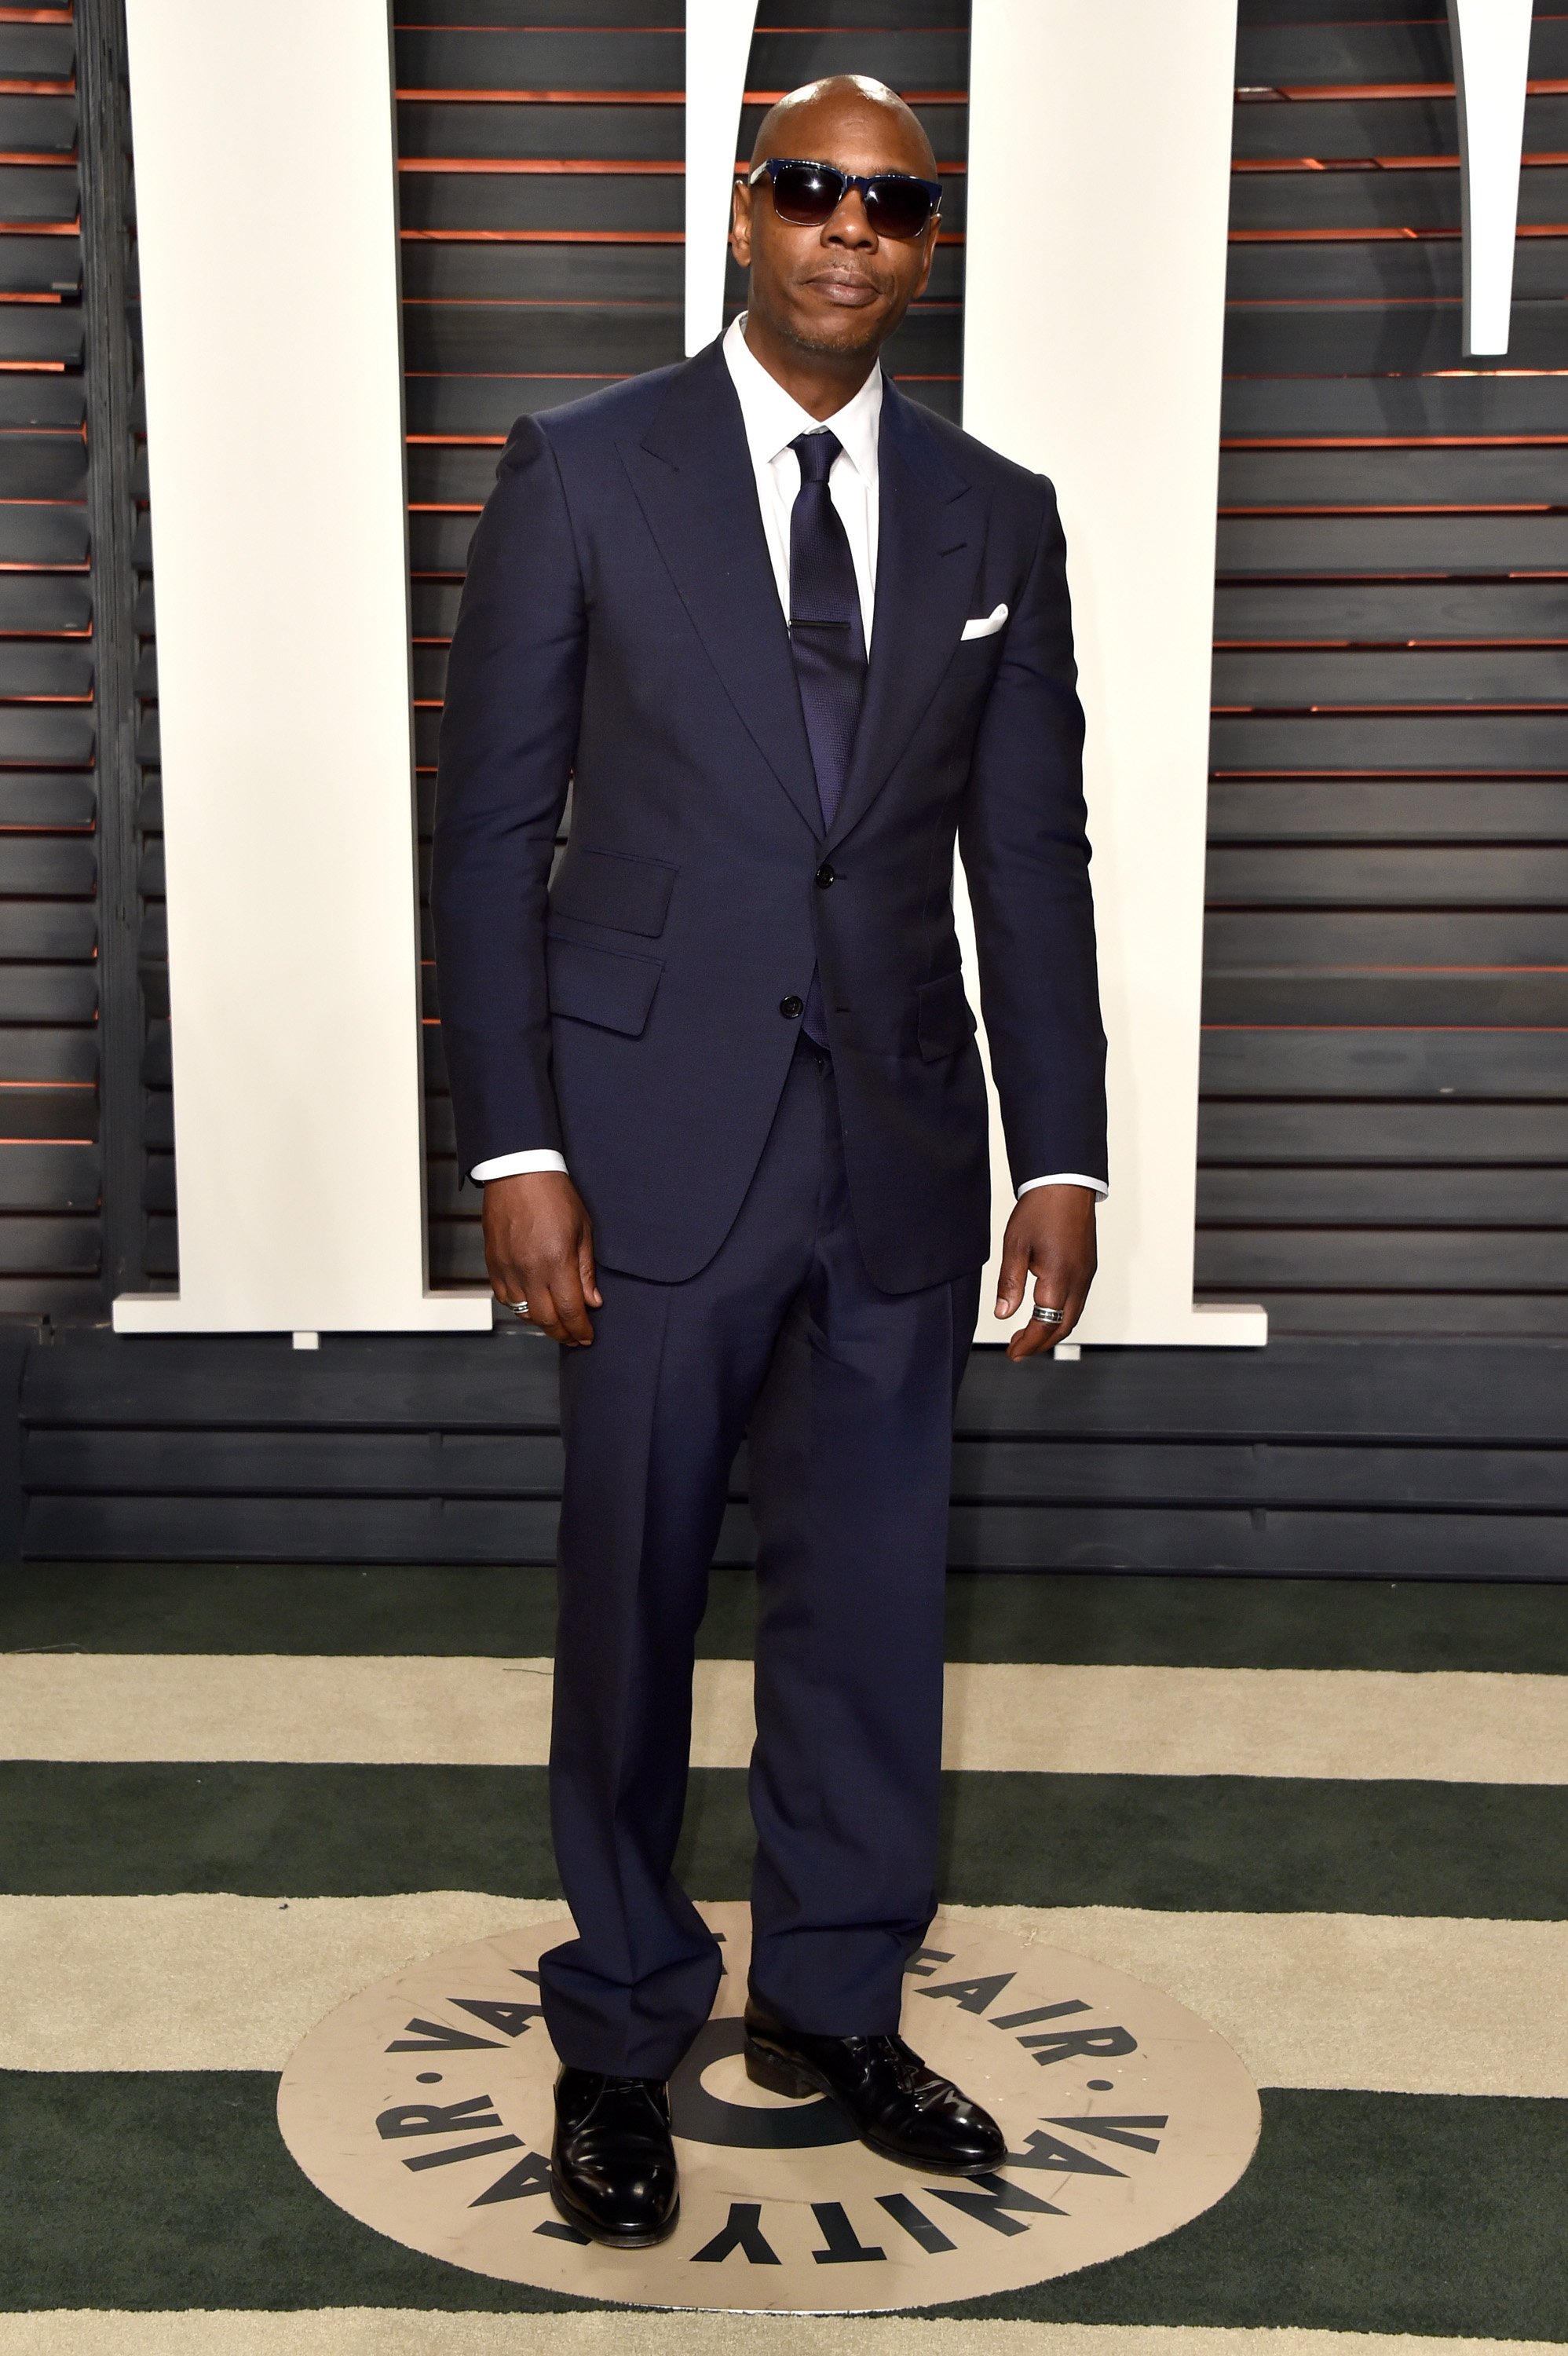 Dave Chappelle attends the 2016 Vanity Fair Oscar Party Hosted By Graydon Carter at the Wallis Annenberg Center for the Performing Arts on February 28, 2016 in Beverly Hills